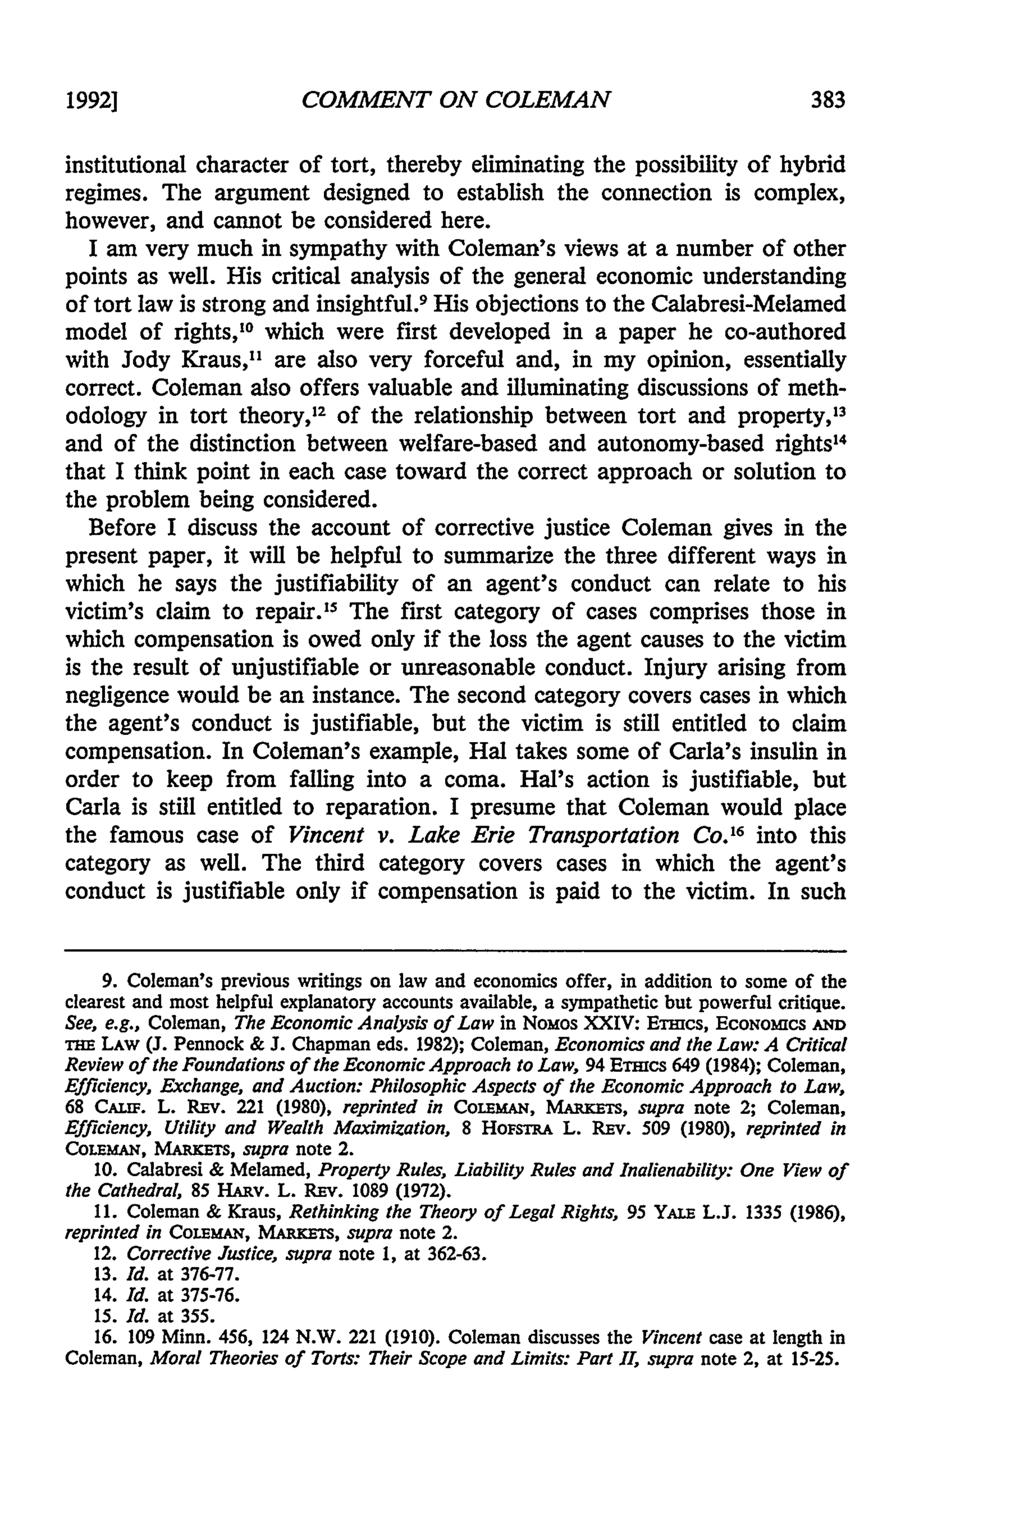 19921 COMMENT ON COLEMAN institutional character of tort, thereby eliminating the possibility of hybrid regimes.